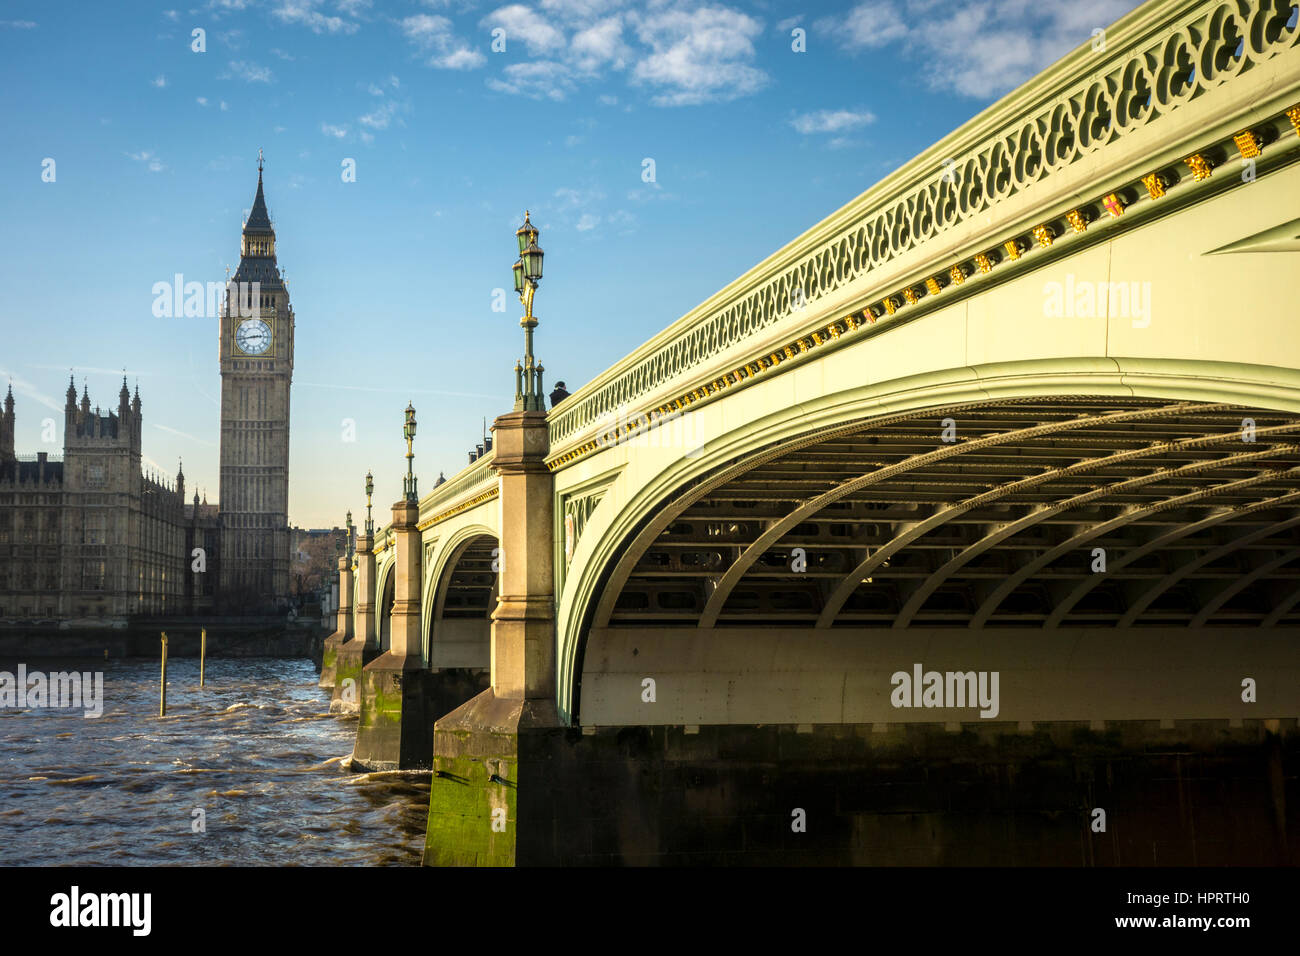 Westminster Bridge and the Palace of Westminster with Big Ben (Elizabeth Tower) in the background. London, UK Stock Photo